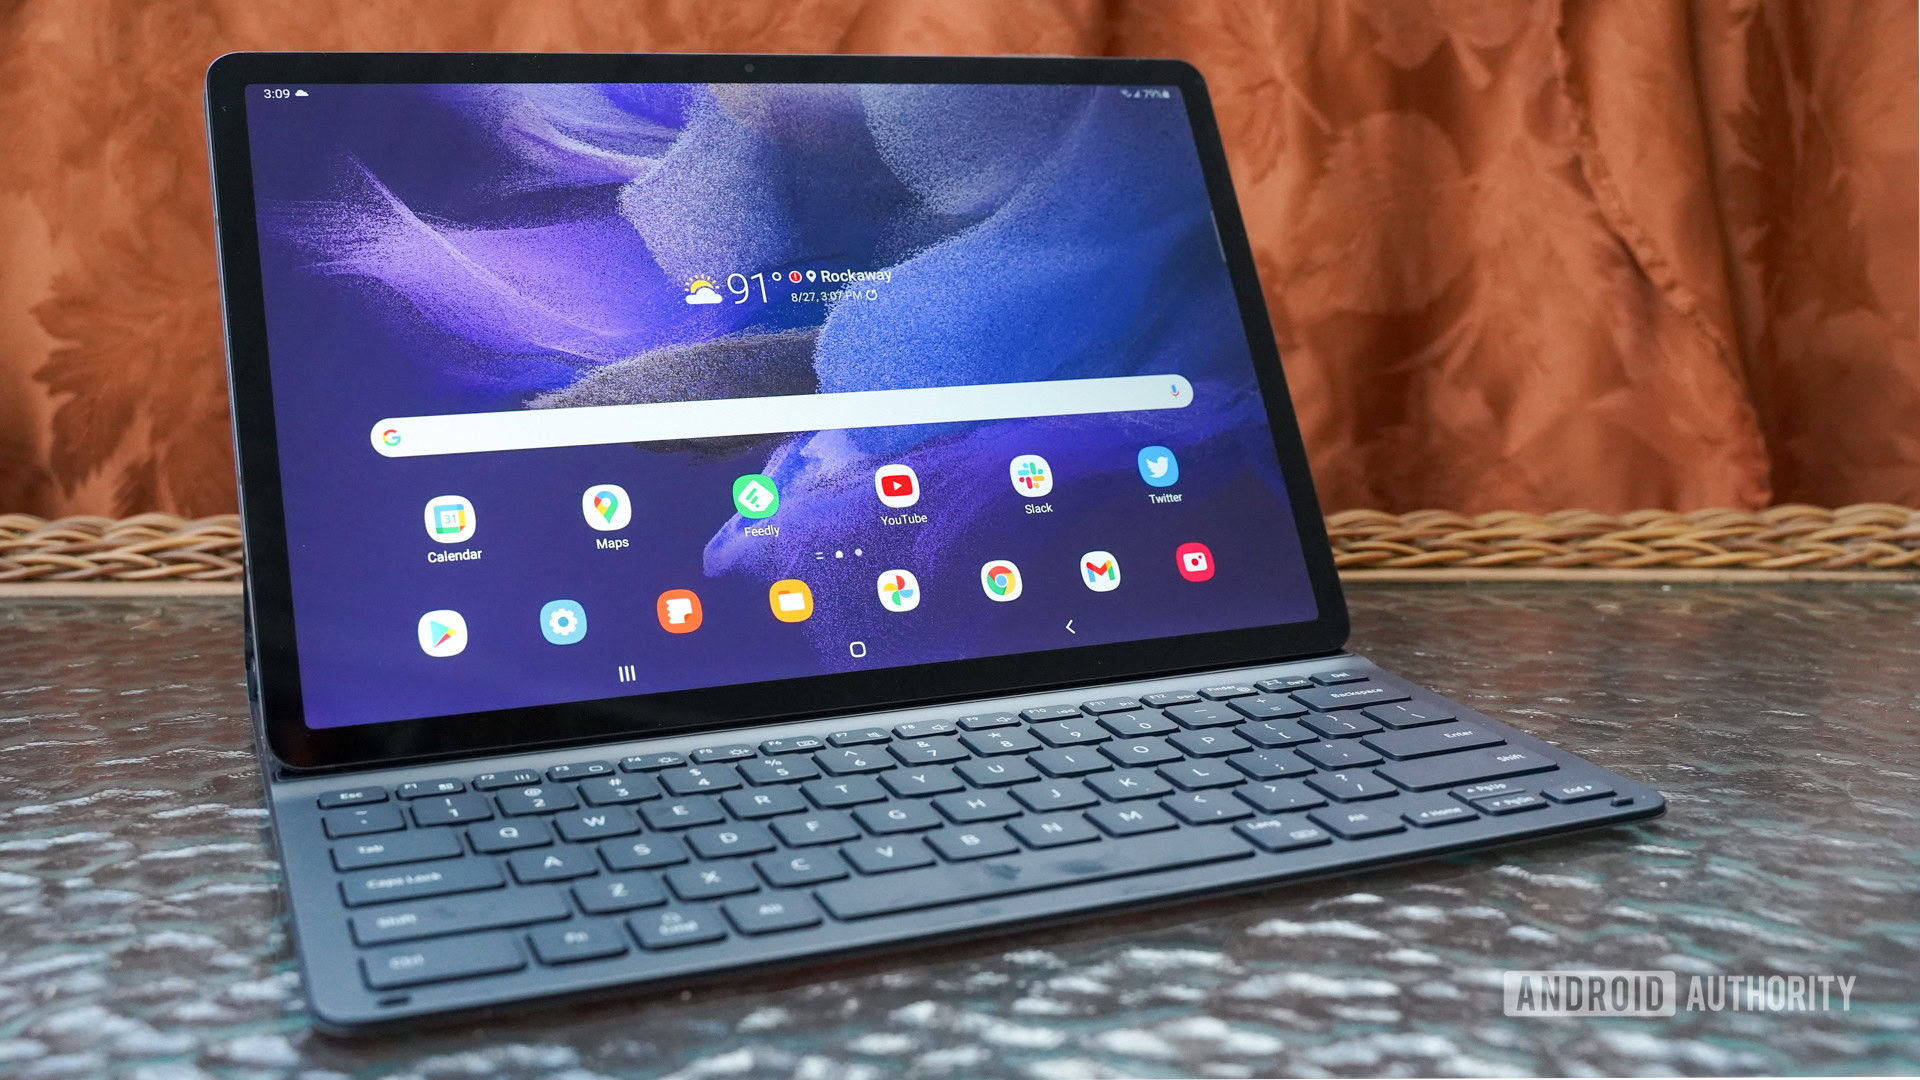 Samsung Galaxy Tab S7 FE review: Pretty, but underpowered